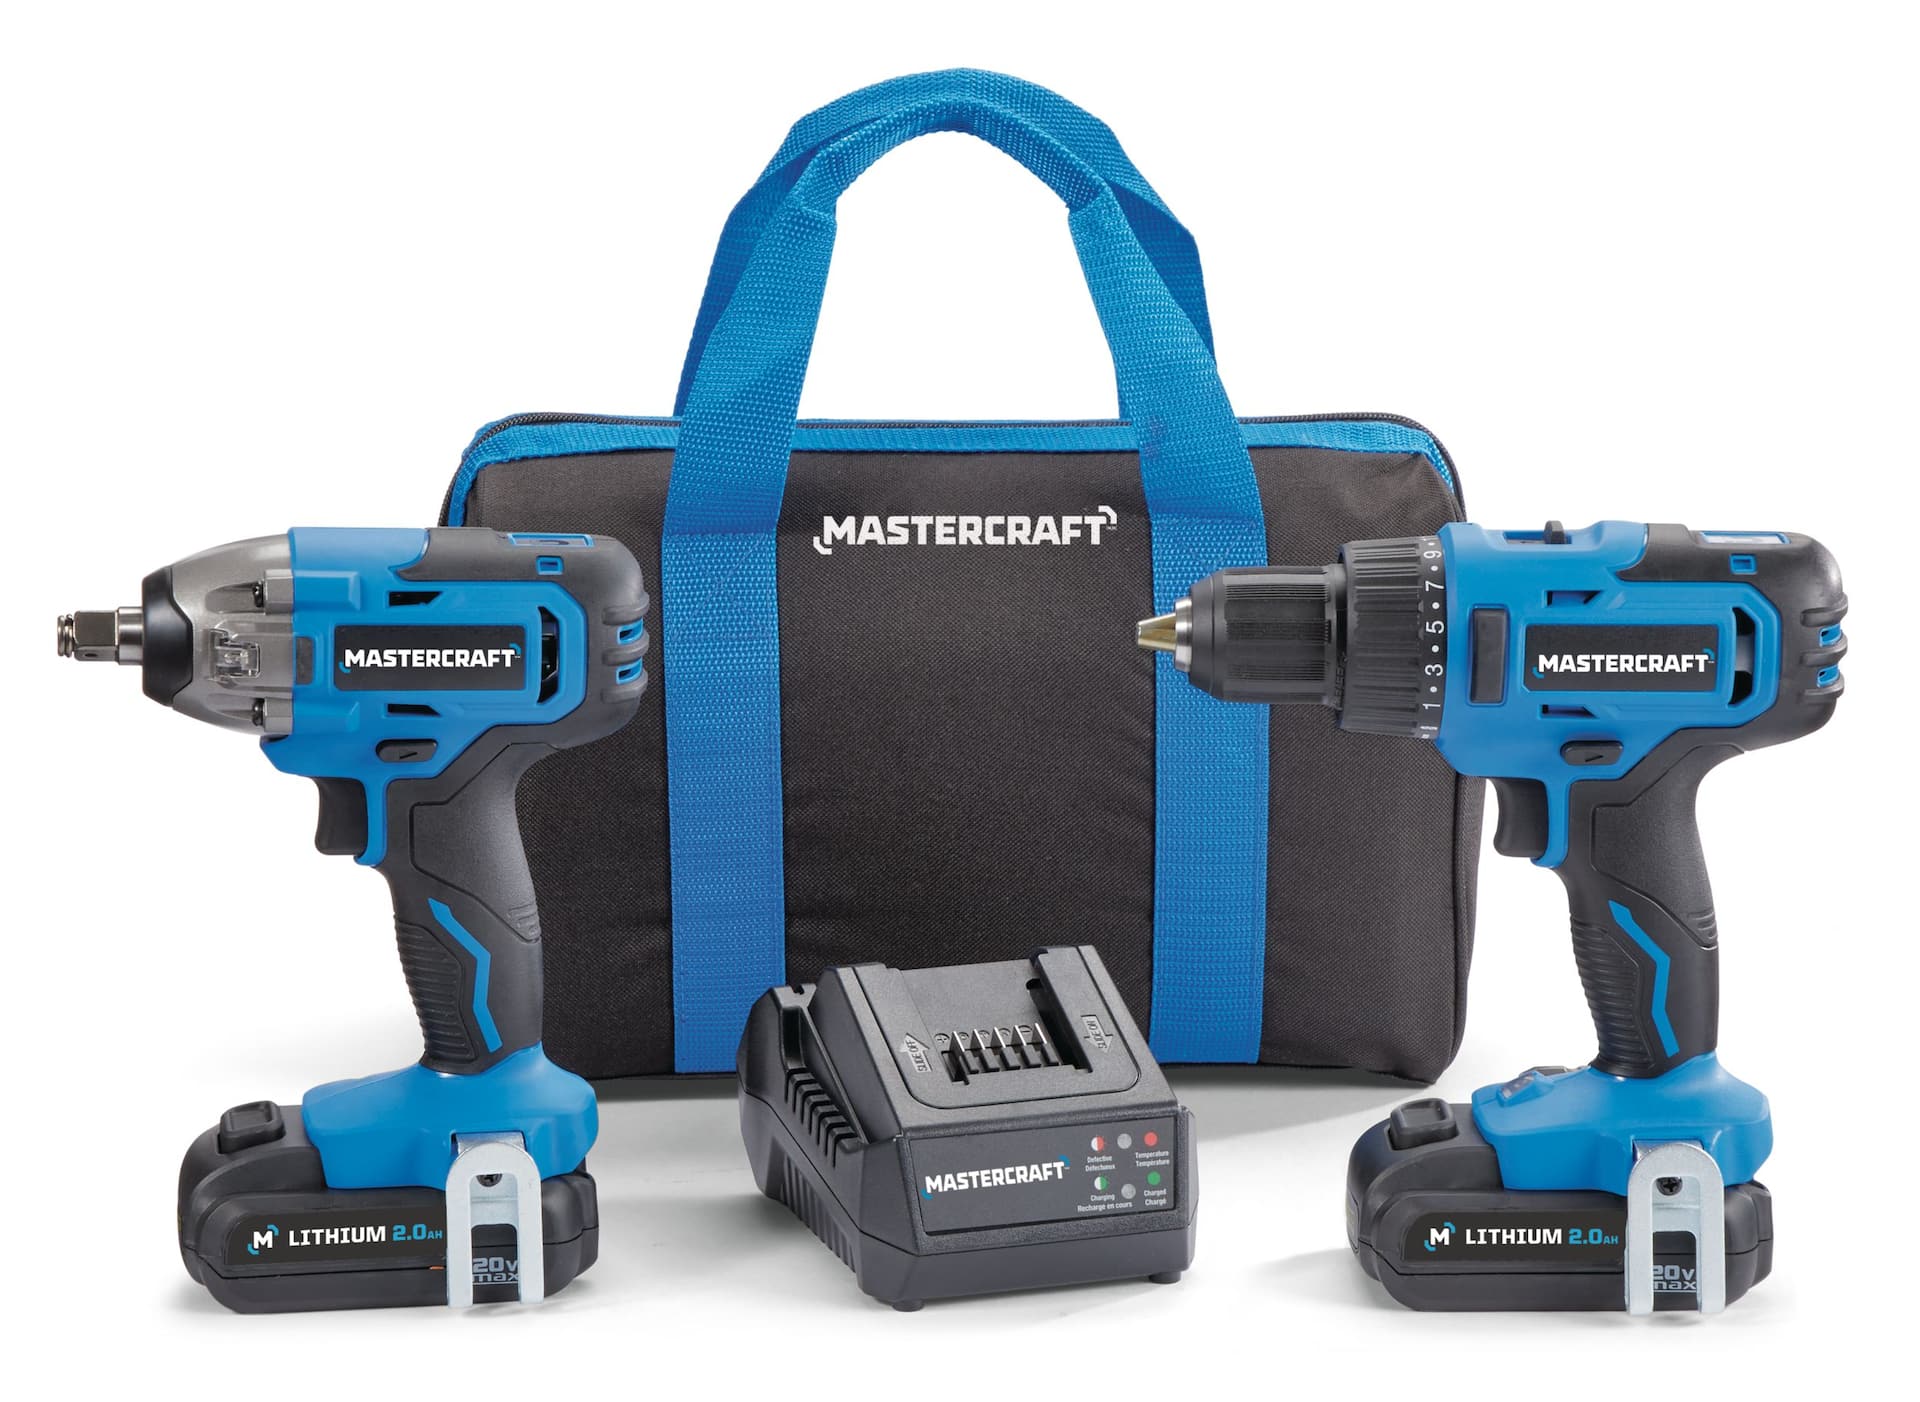 Mastercraft 20V Max Lithium-Ion Cordless Drill & Impact Wrench